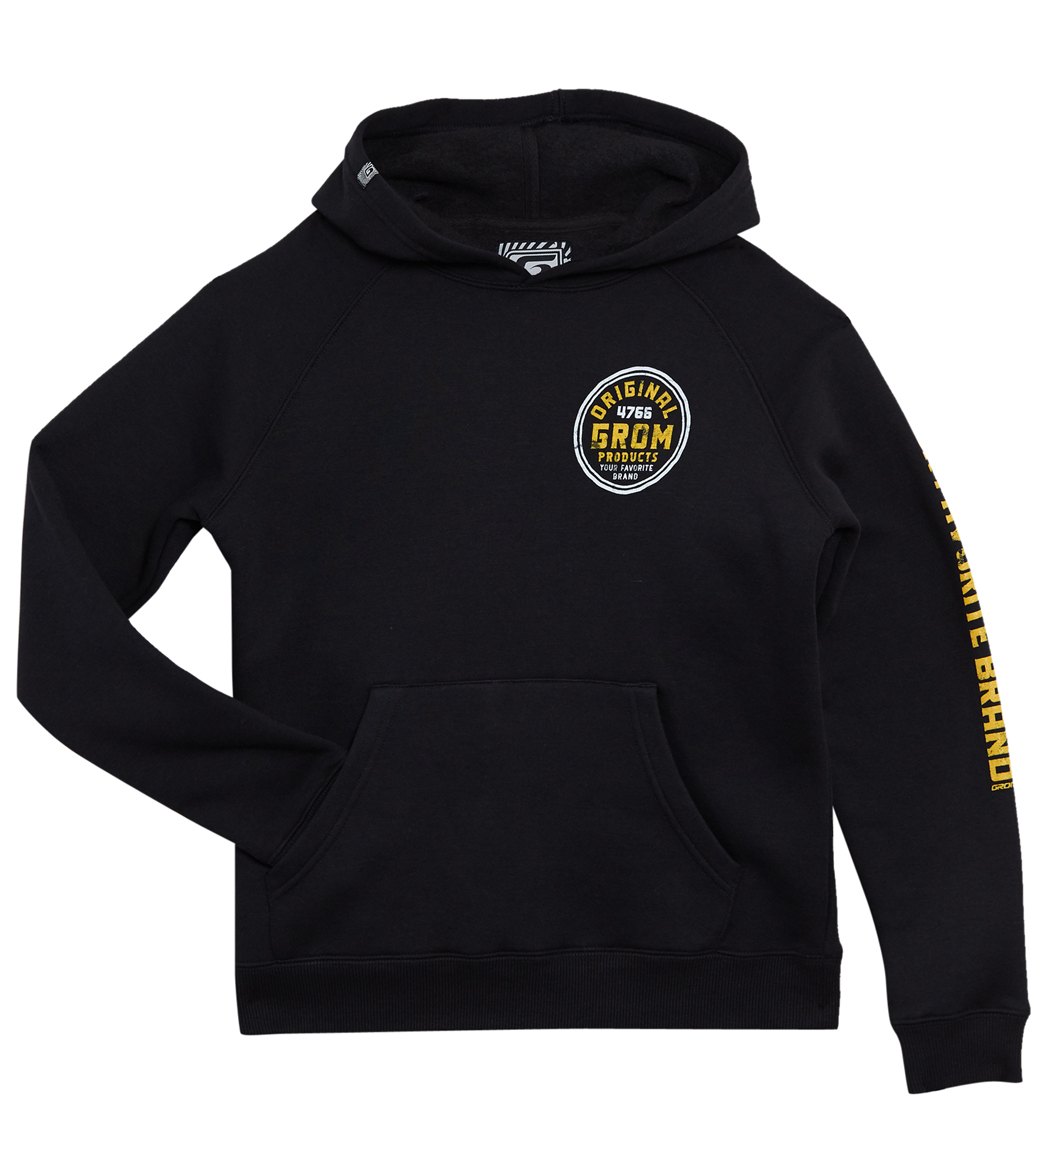 Grom Boys' Original Pullover Hoodie - Black Large 10/12 Cotton/Polyester - Swimoutlet.com